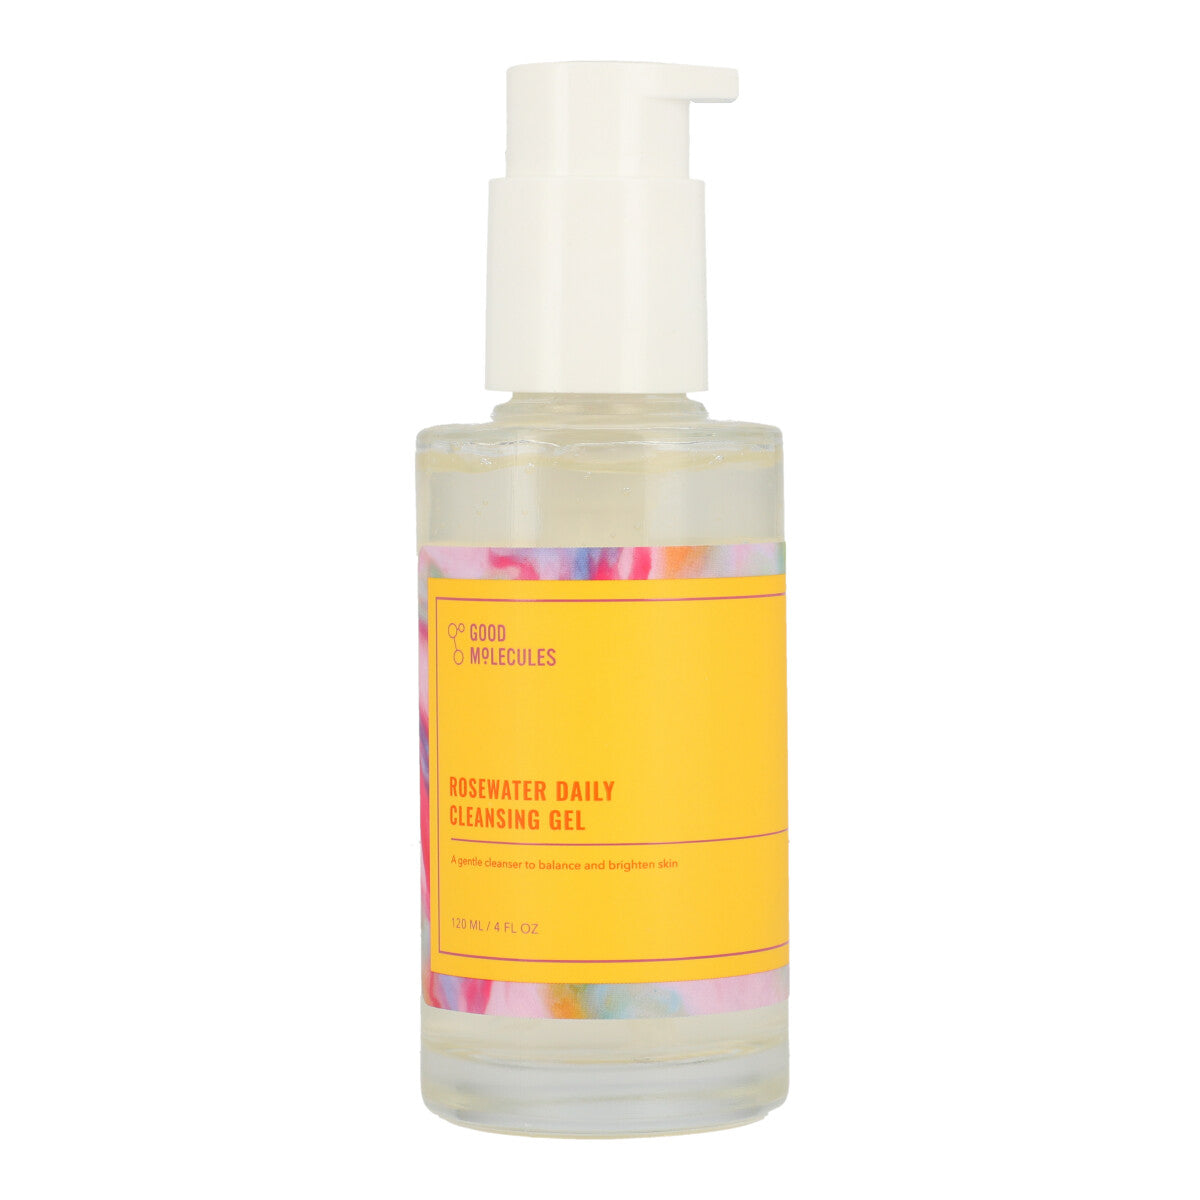 Rosewater Daily Cleansing Gel